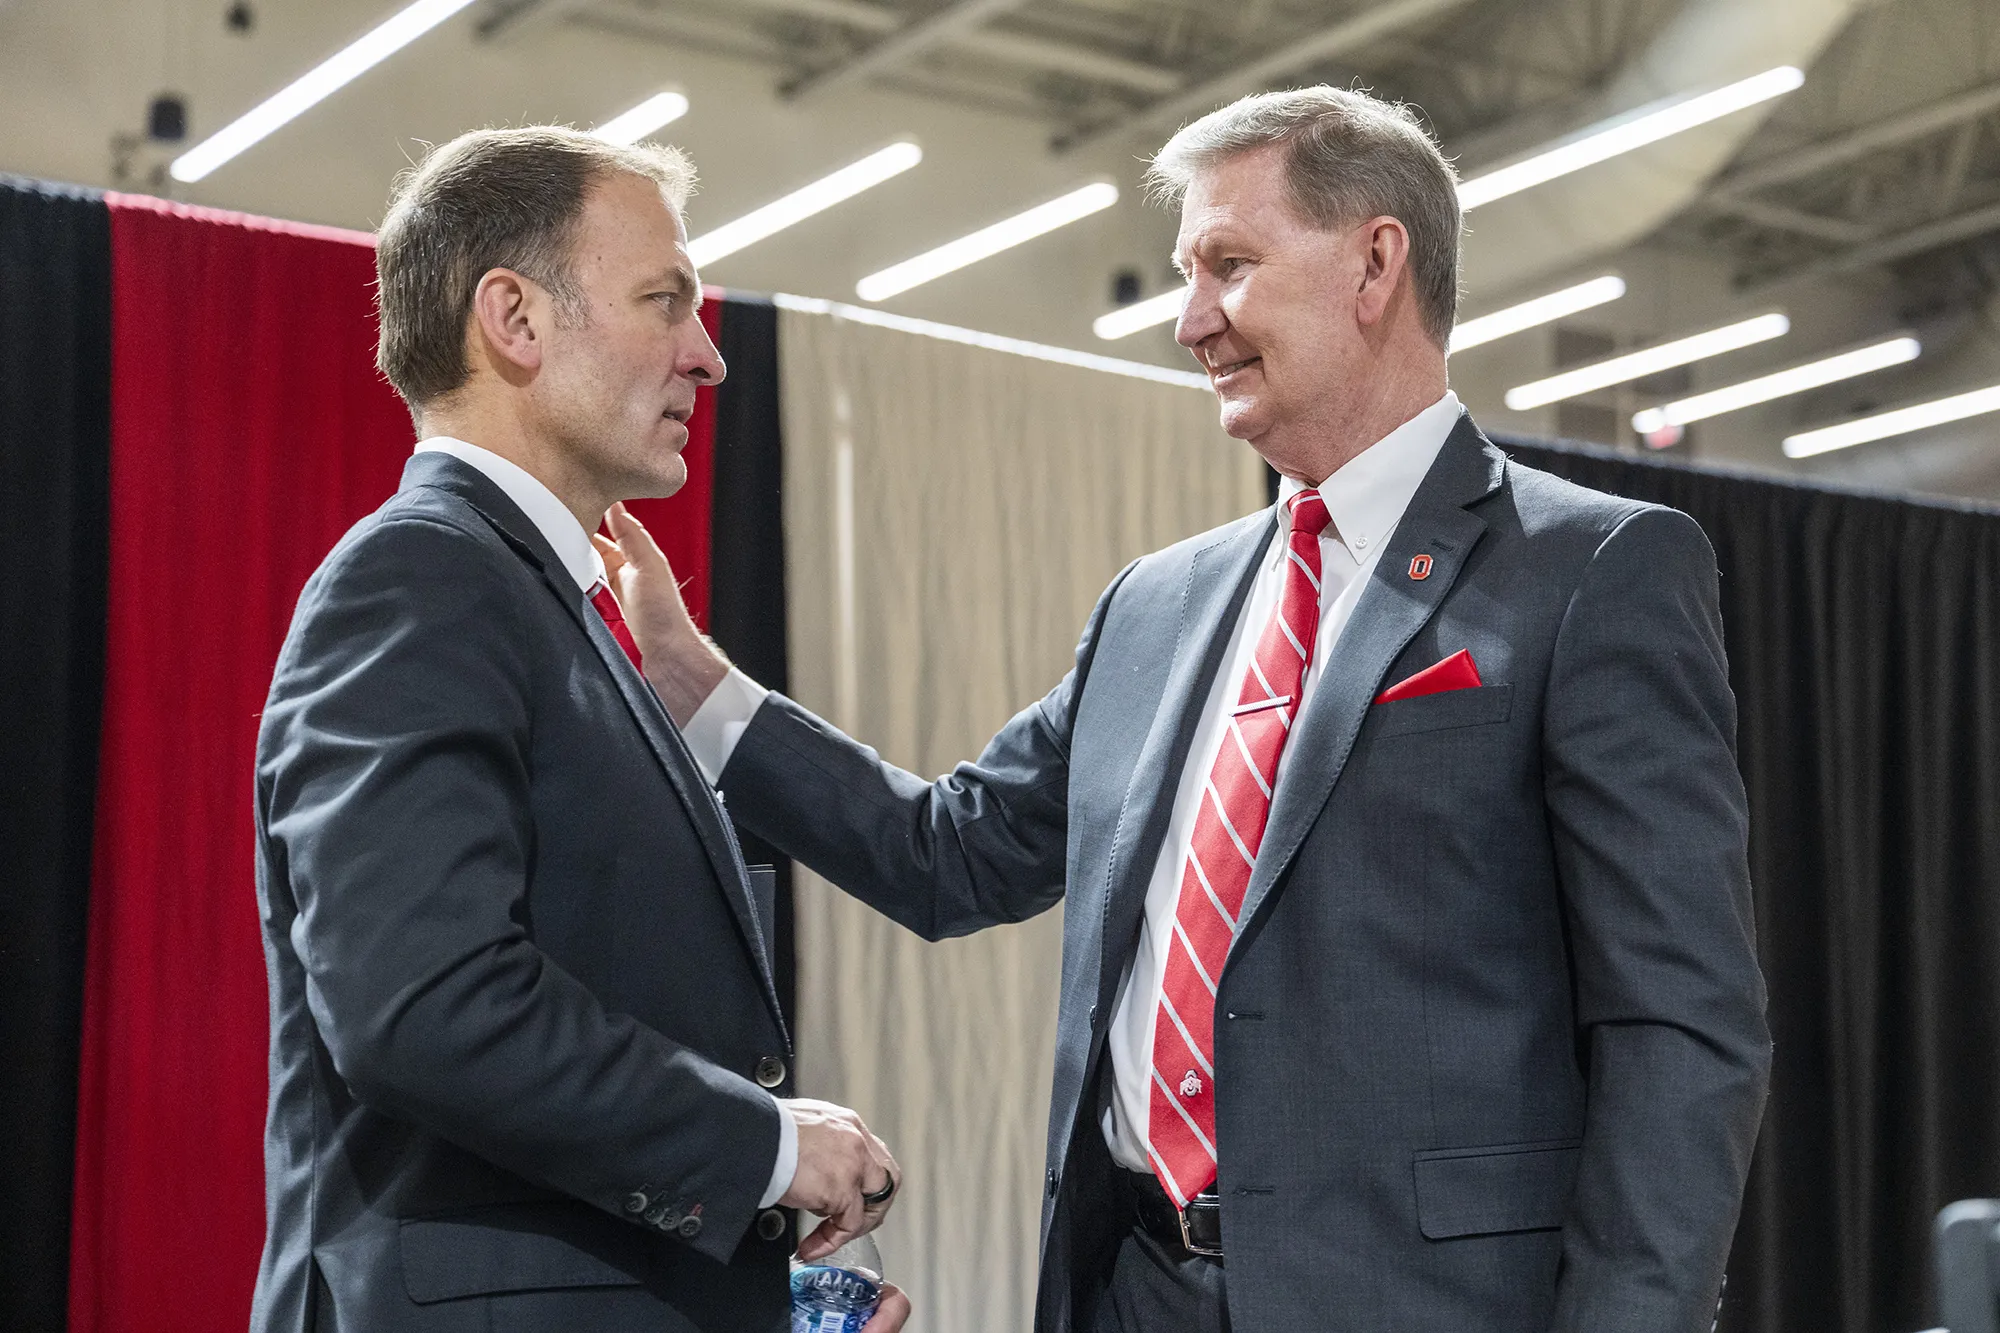 Ohio State President Ted Carter smiles and pats the shoulder of incoming athletic director Ross Bjork before a press conference to introduce him. Behind them are curtained panels. Both are white men in similarly colored suits and ties, but where President Carter seems relaxed, Bjork, in this moment the camera caught, seems as if he might be a bit nervous. 